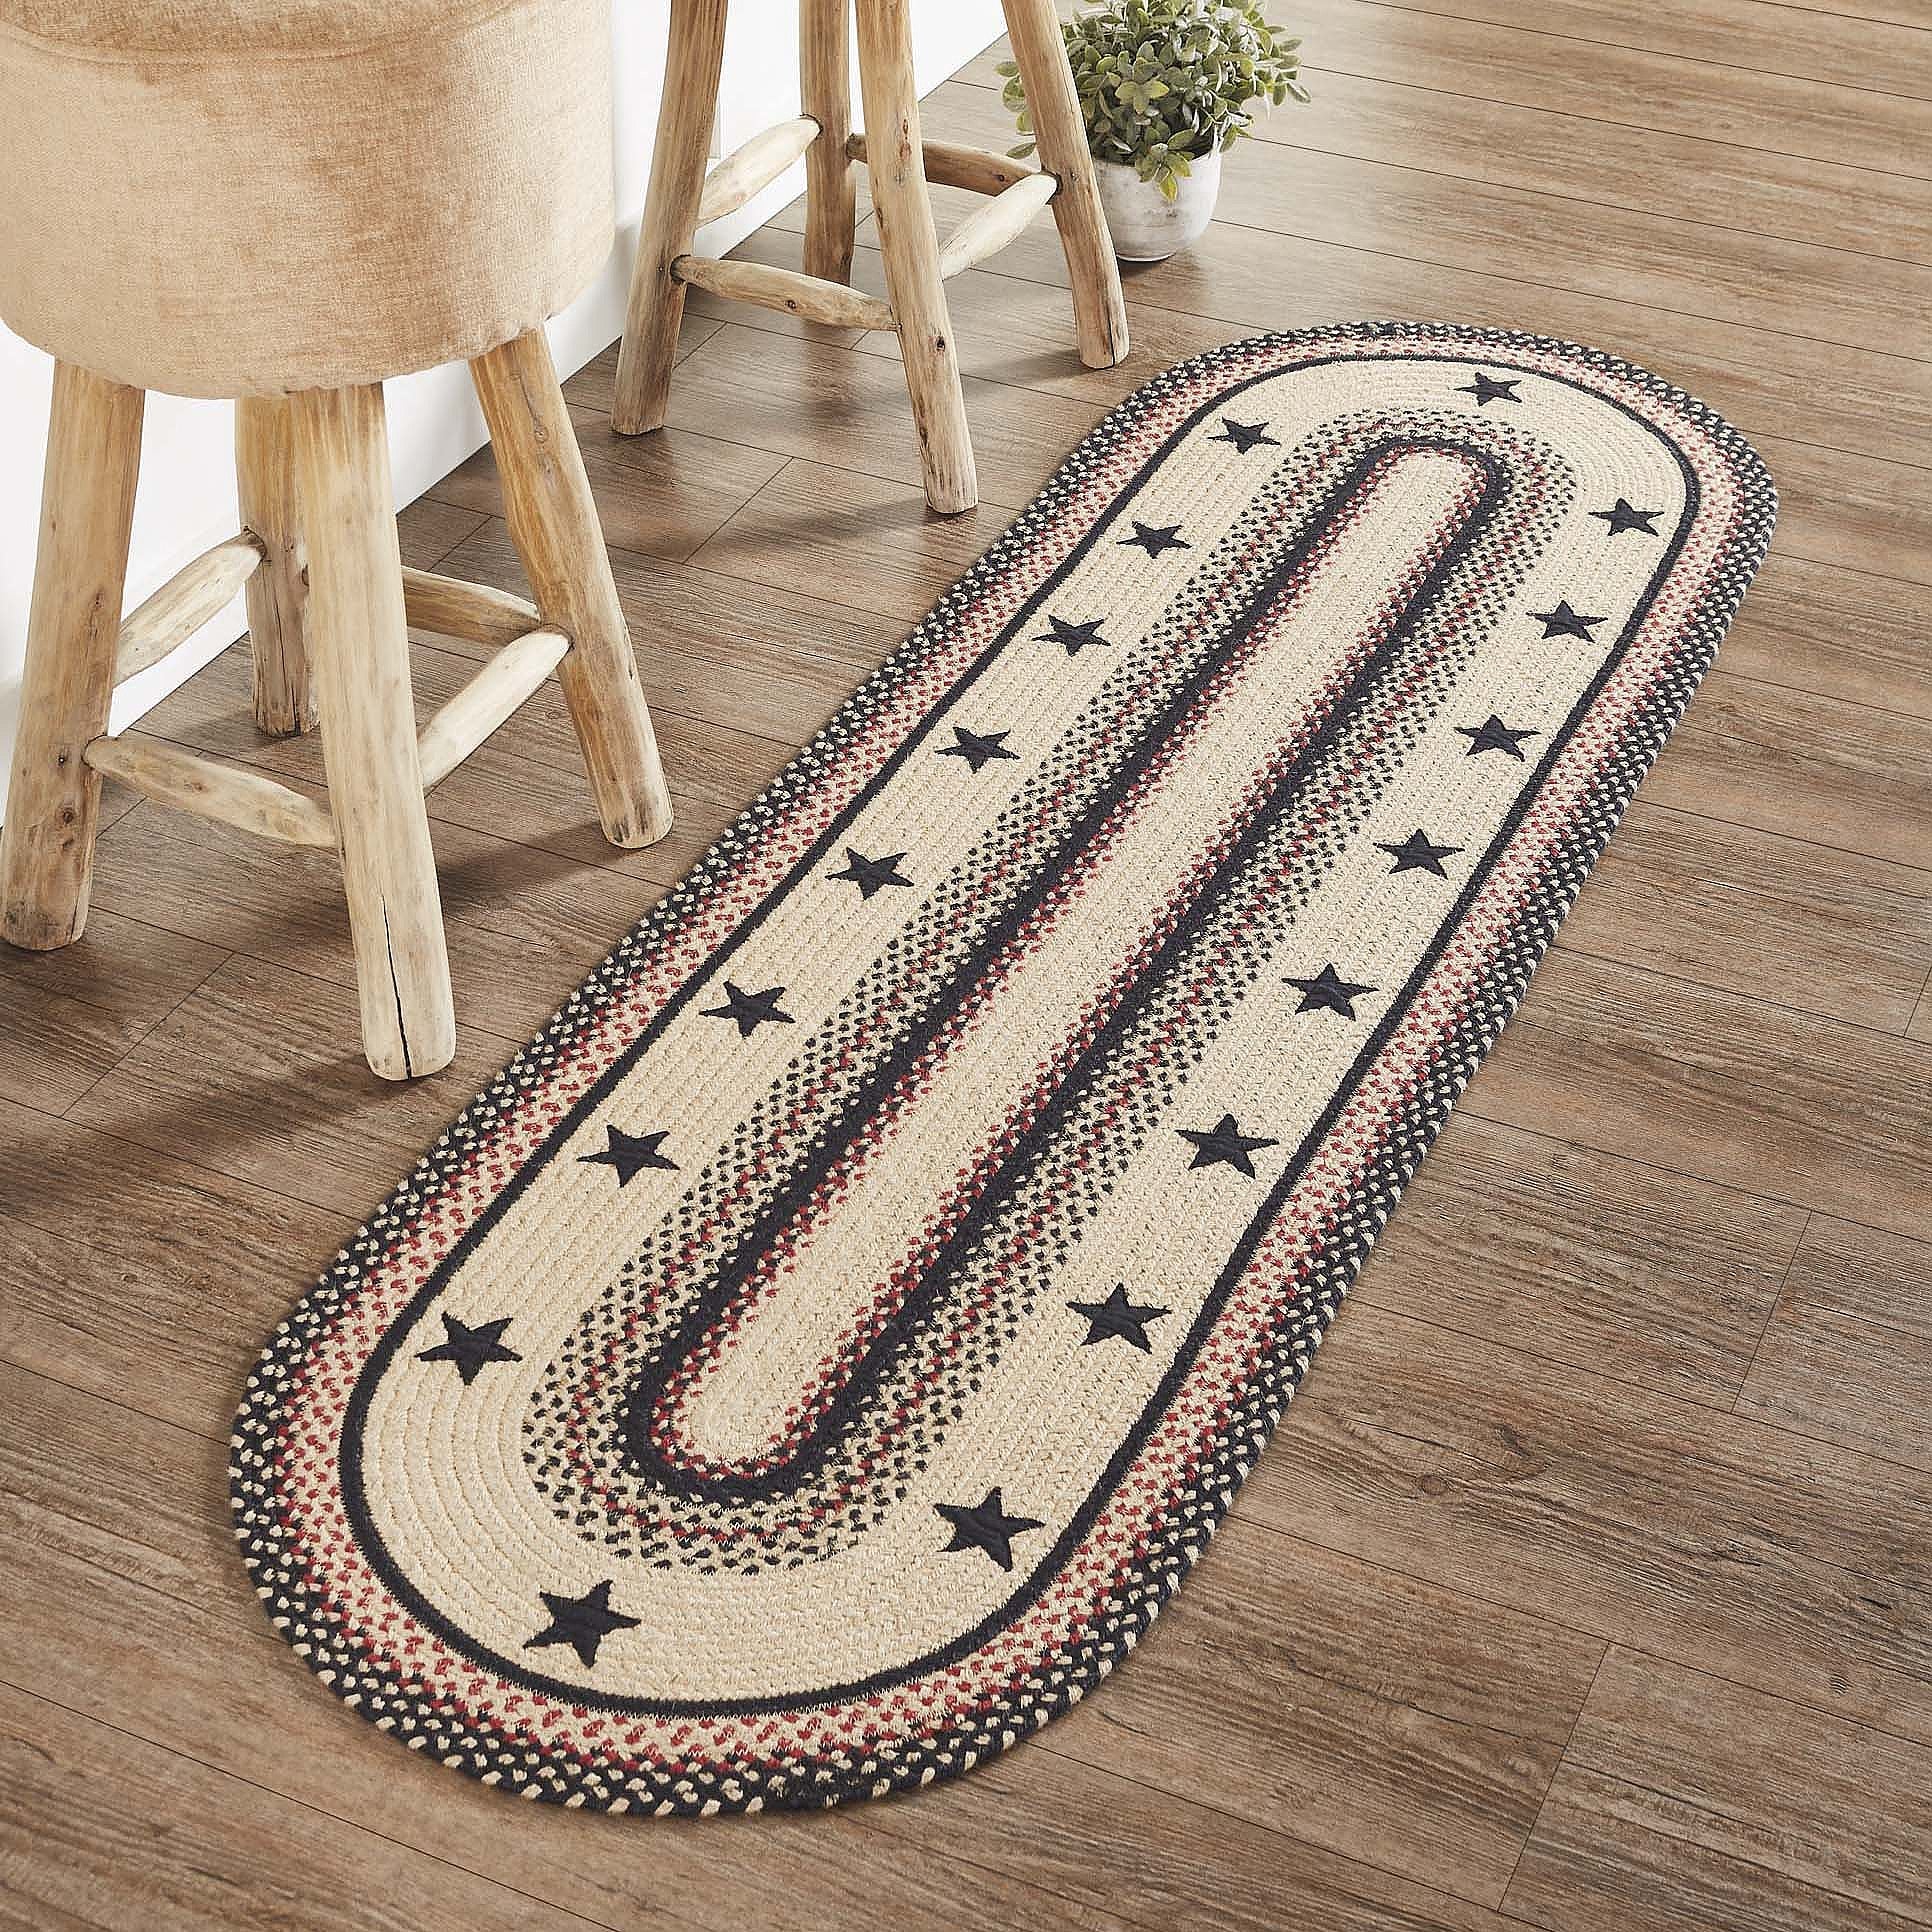 Colonial Star Jute Braided Rug/Runner Oval with Rug Pad 22"x72" VHC Brands